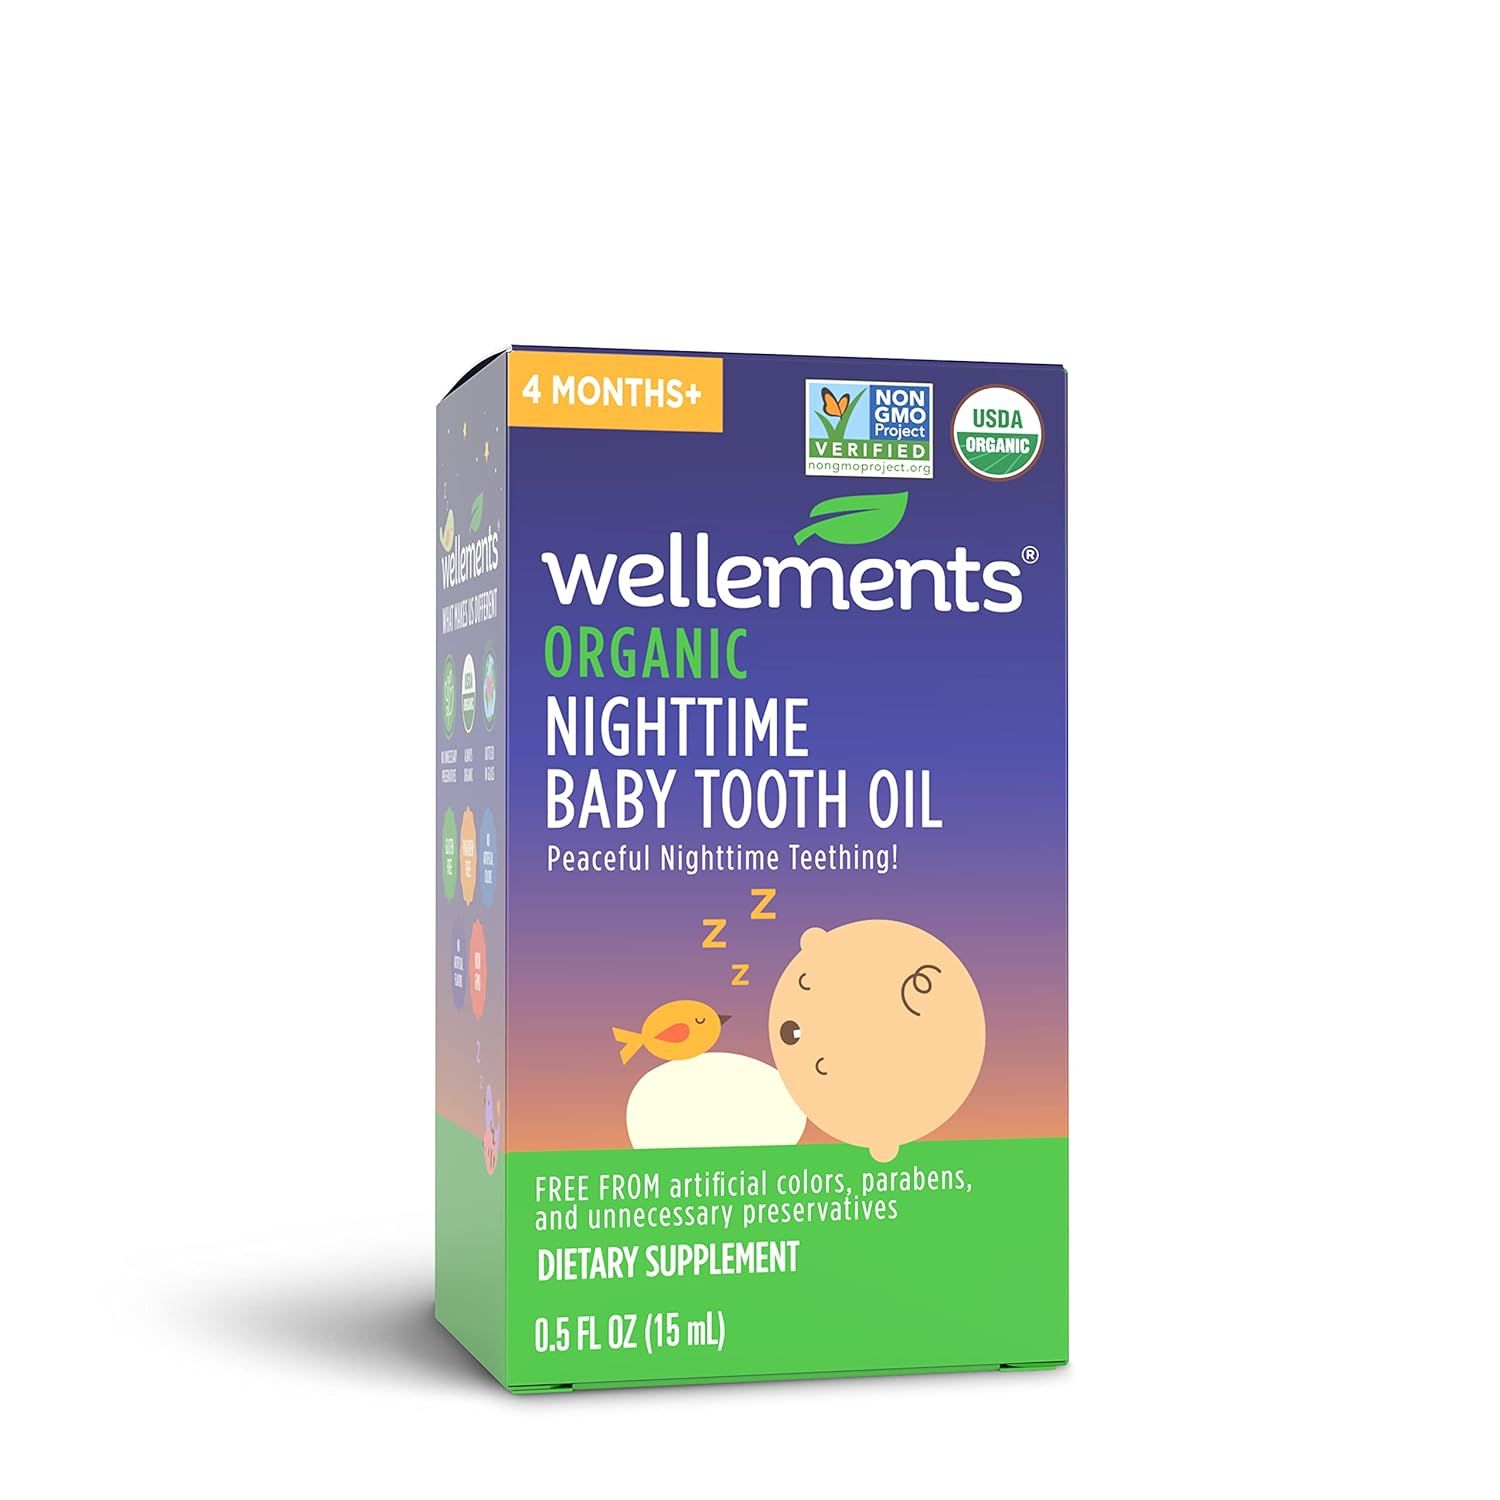 Wellements Organic Nighttime Baby Tooth Oil for Teething, Free from Dyes, Parabens, Preservatives... | Amazon (US)